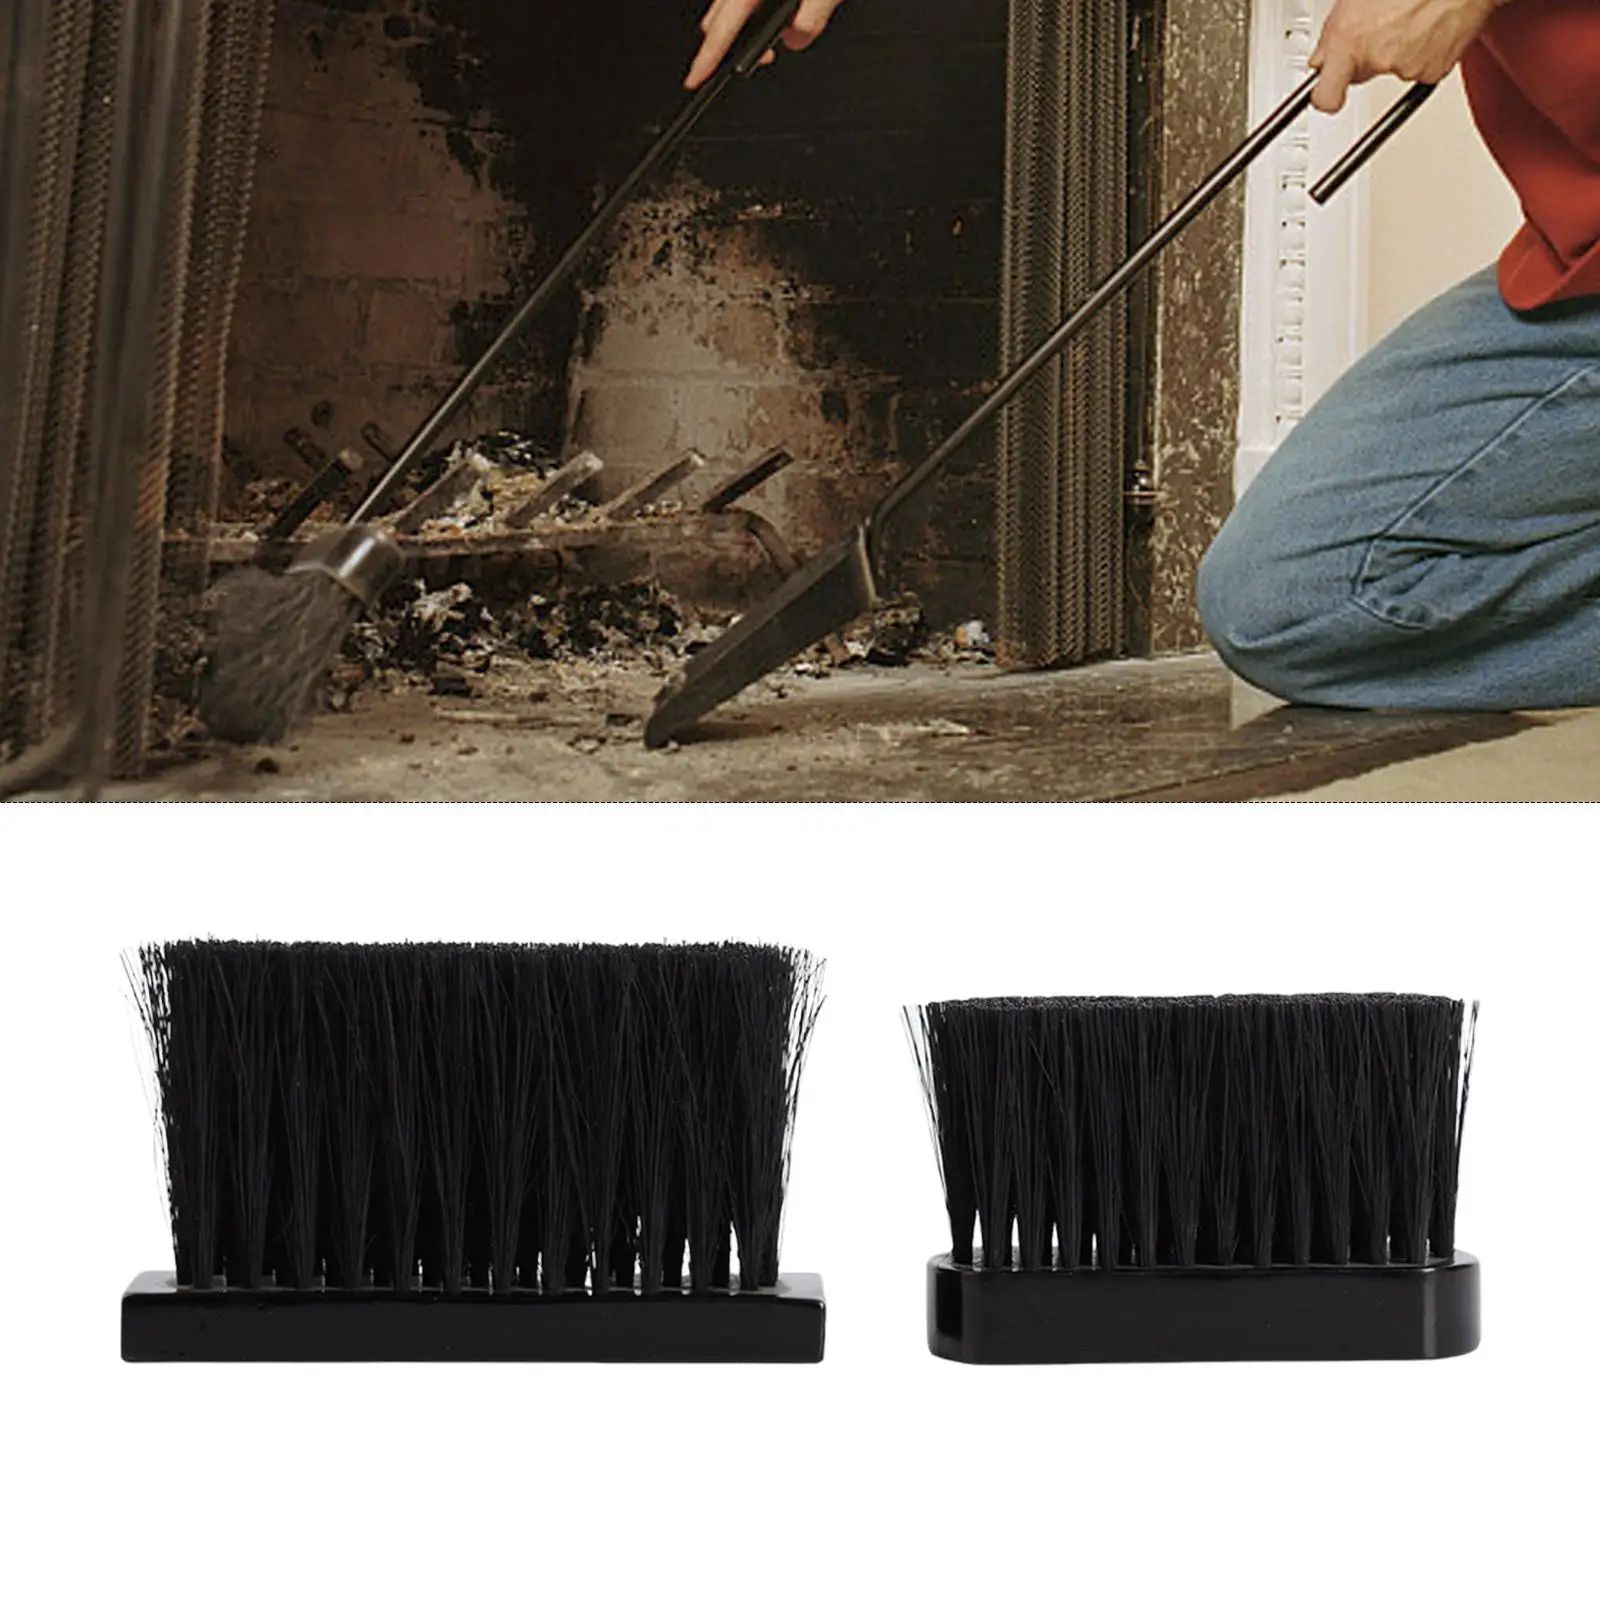 2Pack Fireplace Brush with Wooden Handle Chimney Durable Oblong Replacement Holder Firewood Fireplace for Fireplaces Hearths